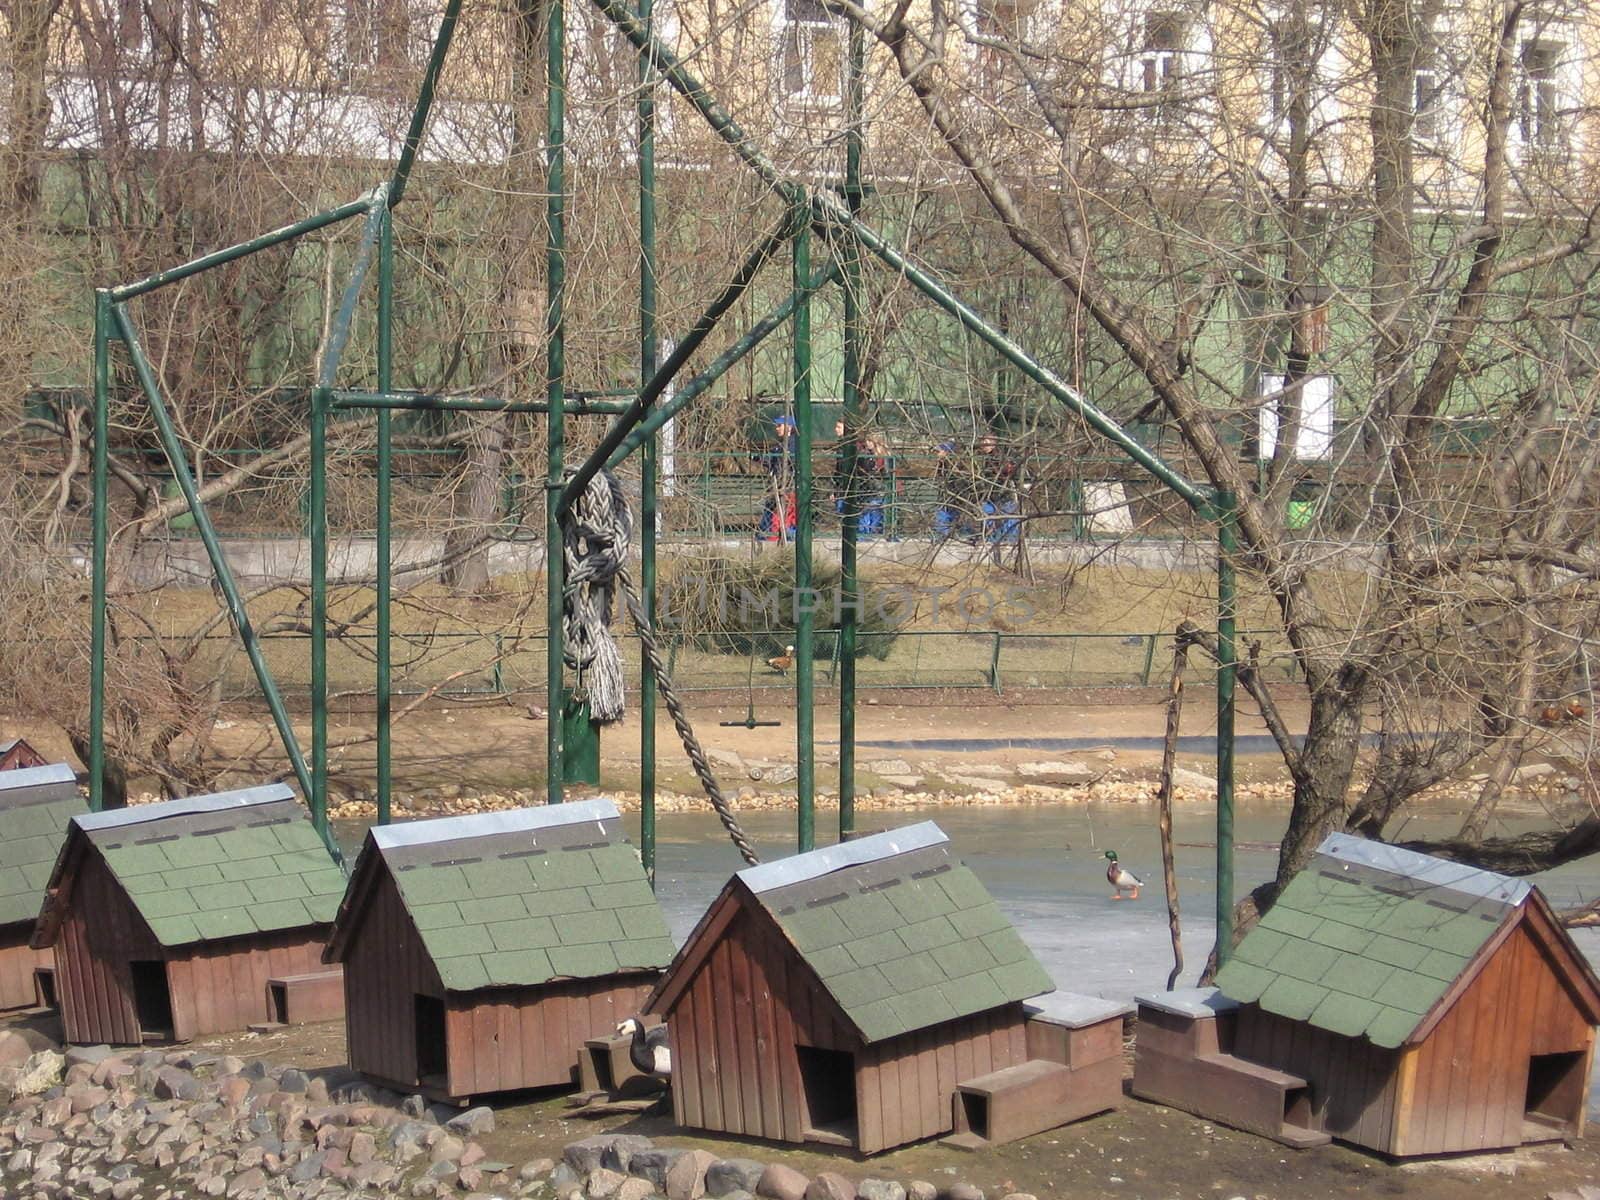 Cute duck houses on the island in Moscow zoo